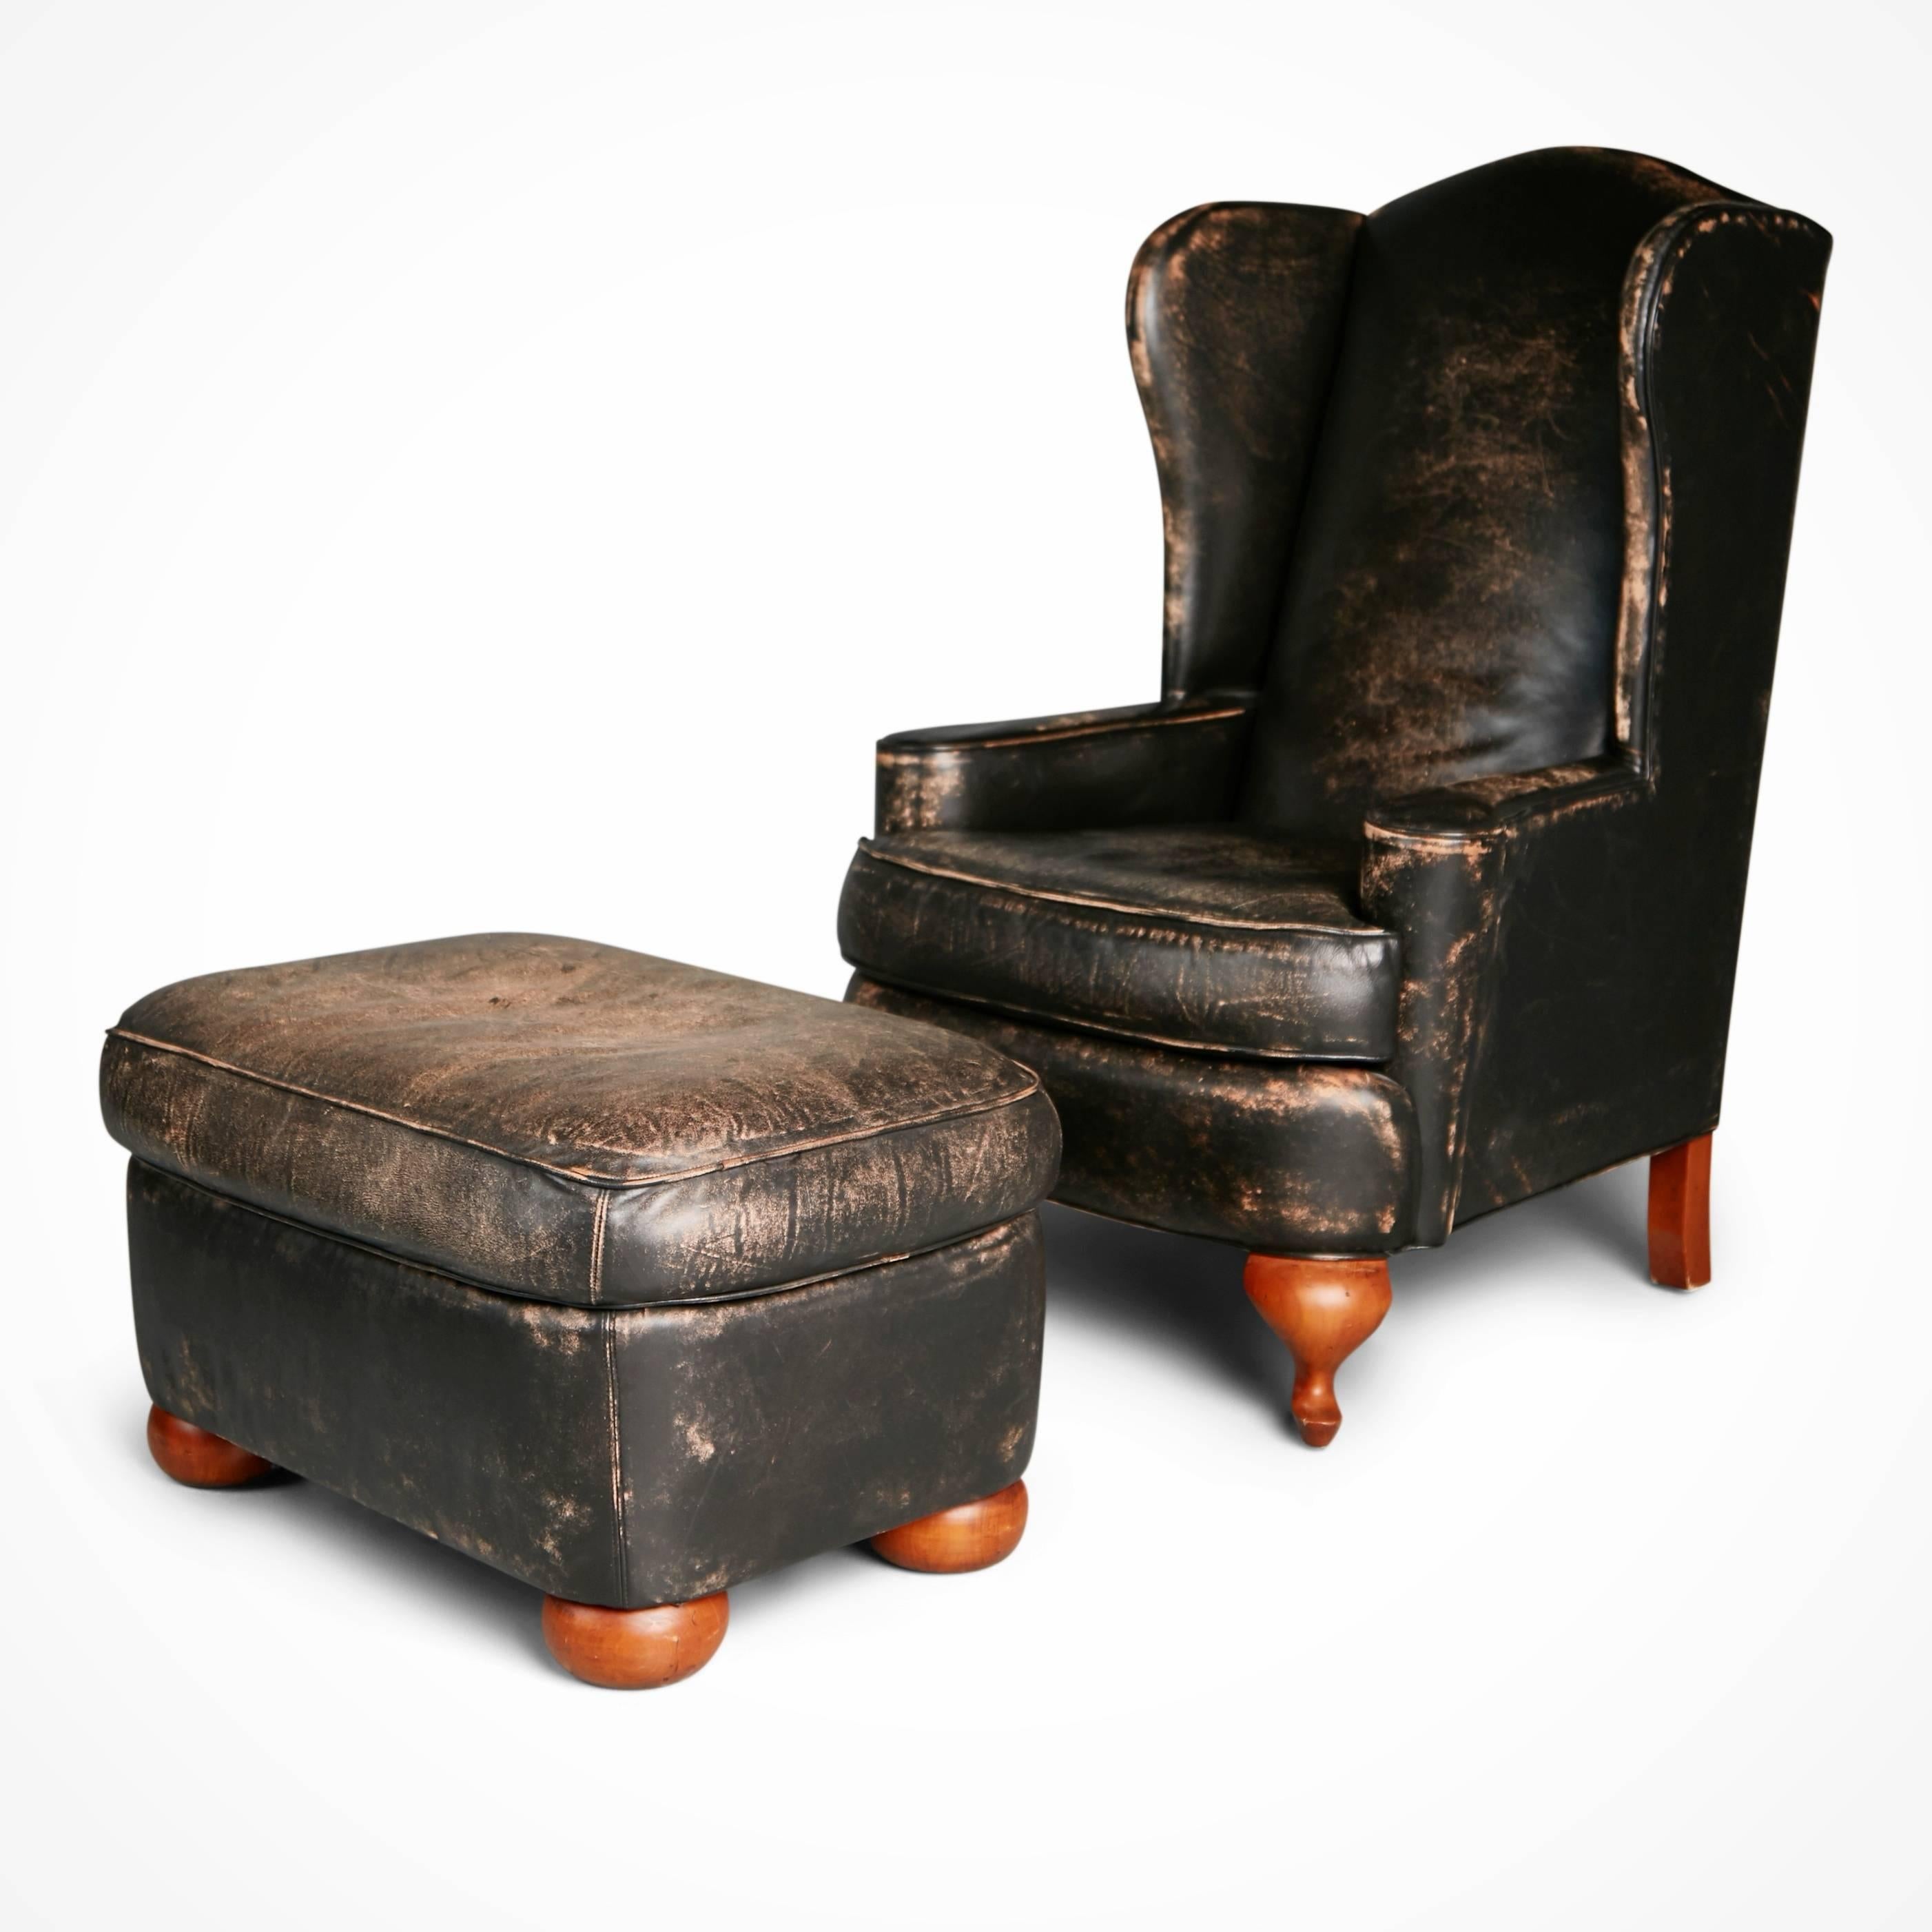 Pair of Ralph Lauren for Henredon leather wingback chairs and matching ottomans. These wing chairs with tall backs and counterpart ottomans are upholstered in black leather which features a distressed look to simulate age and use. The highly